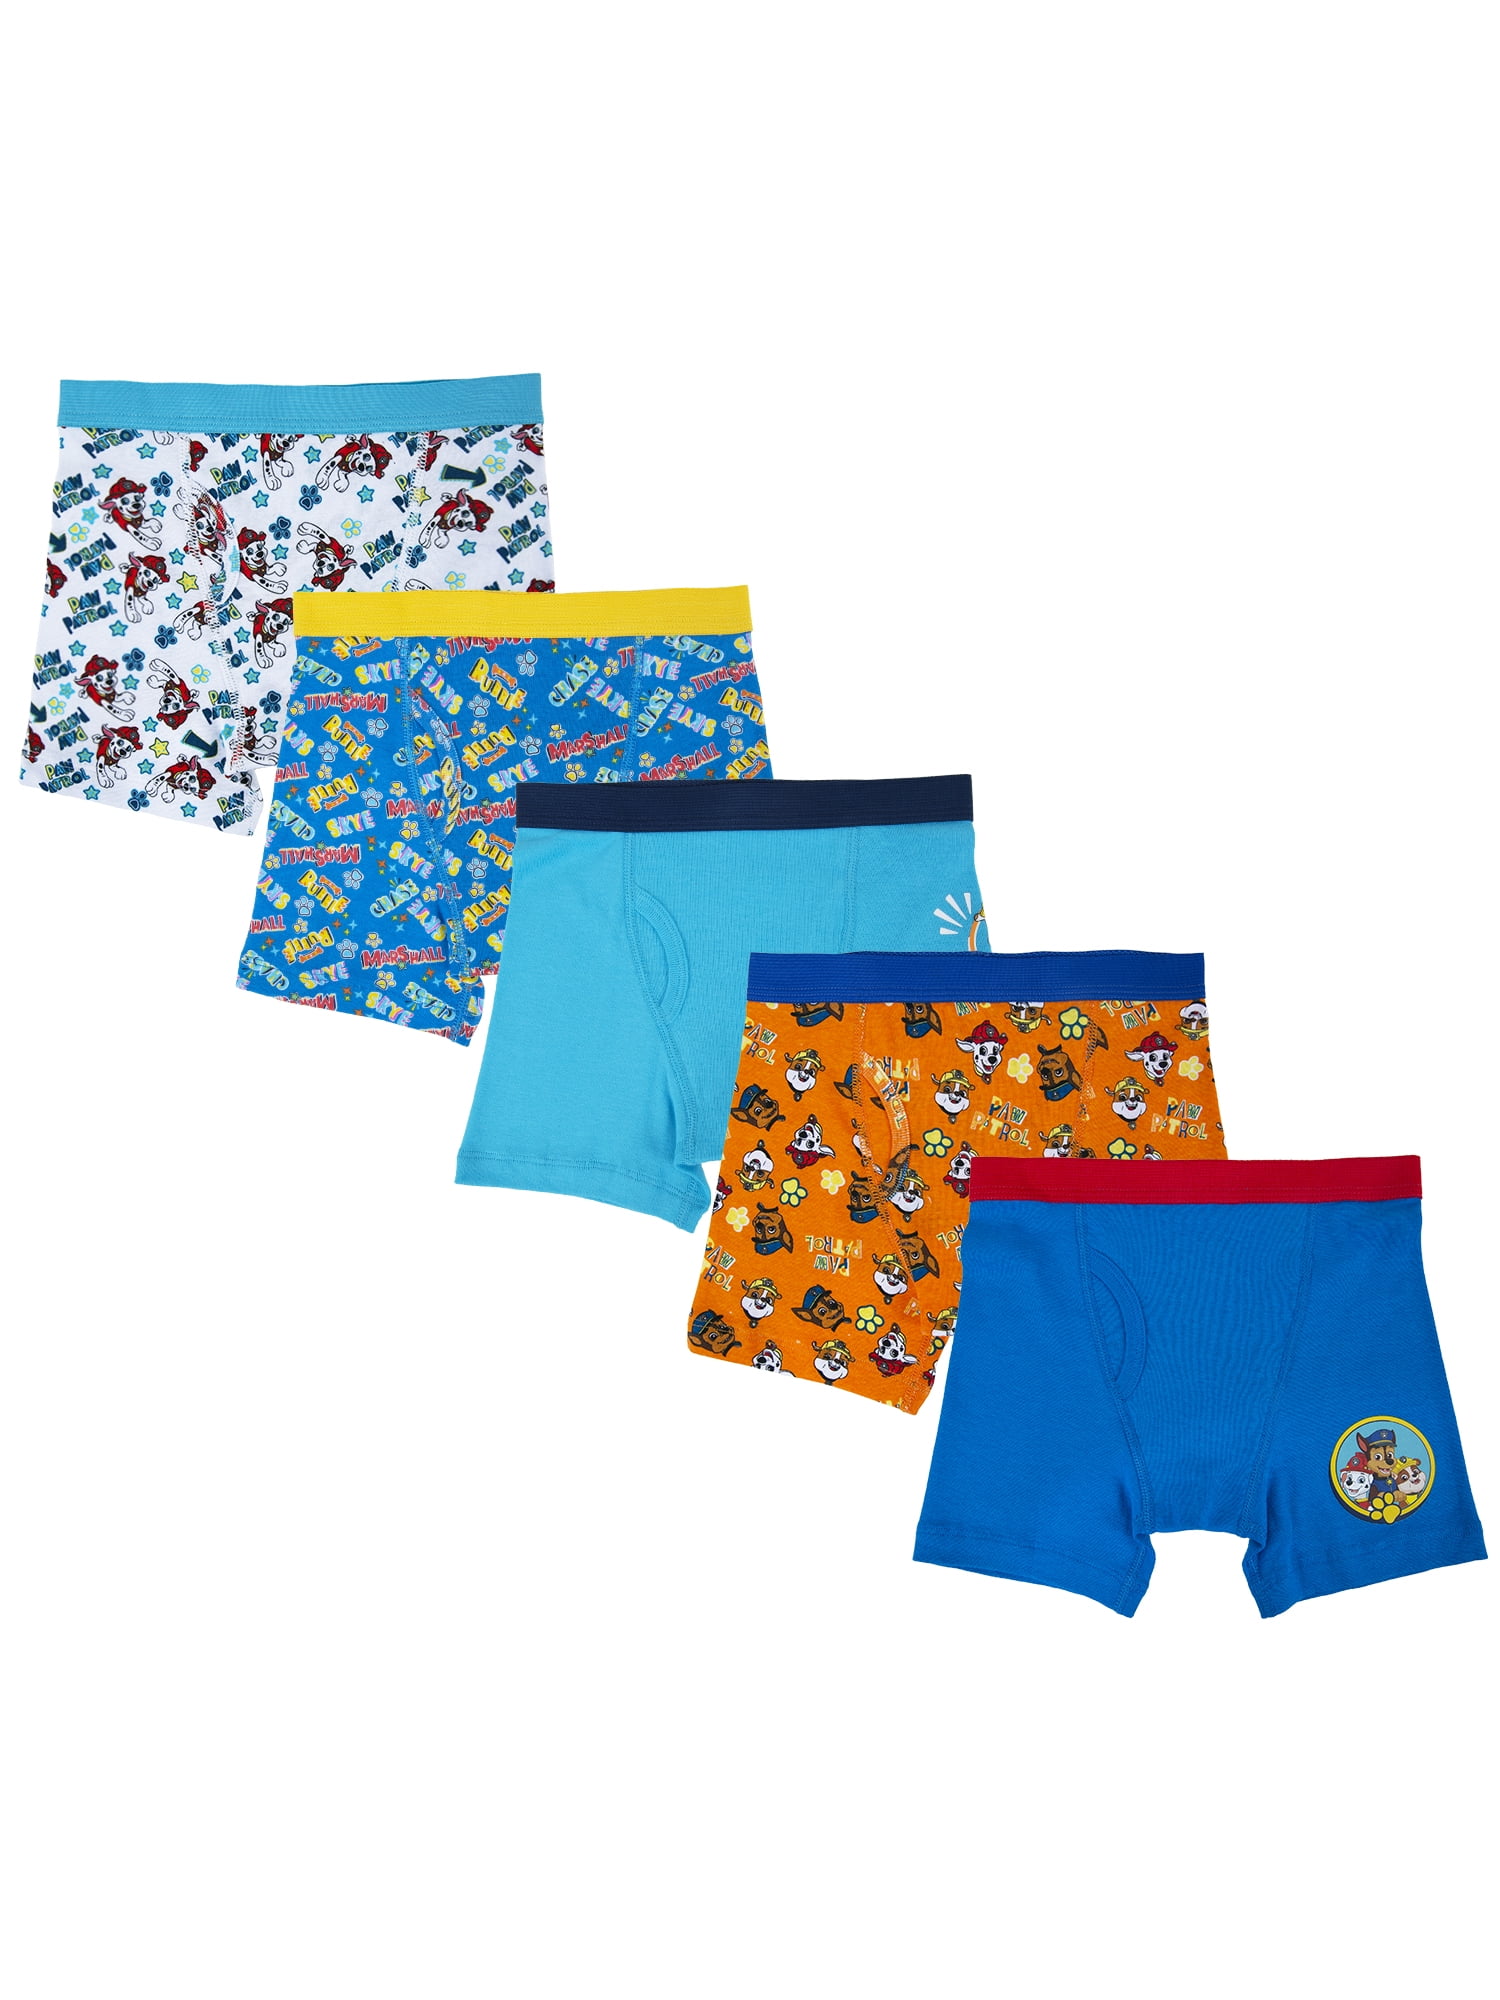 Paw Patrol Characters 5-Pack of Boys' Boxer Briefs-6